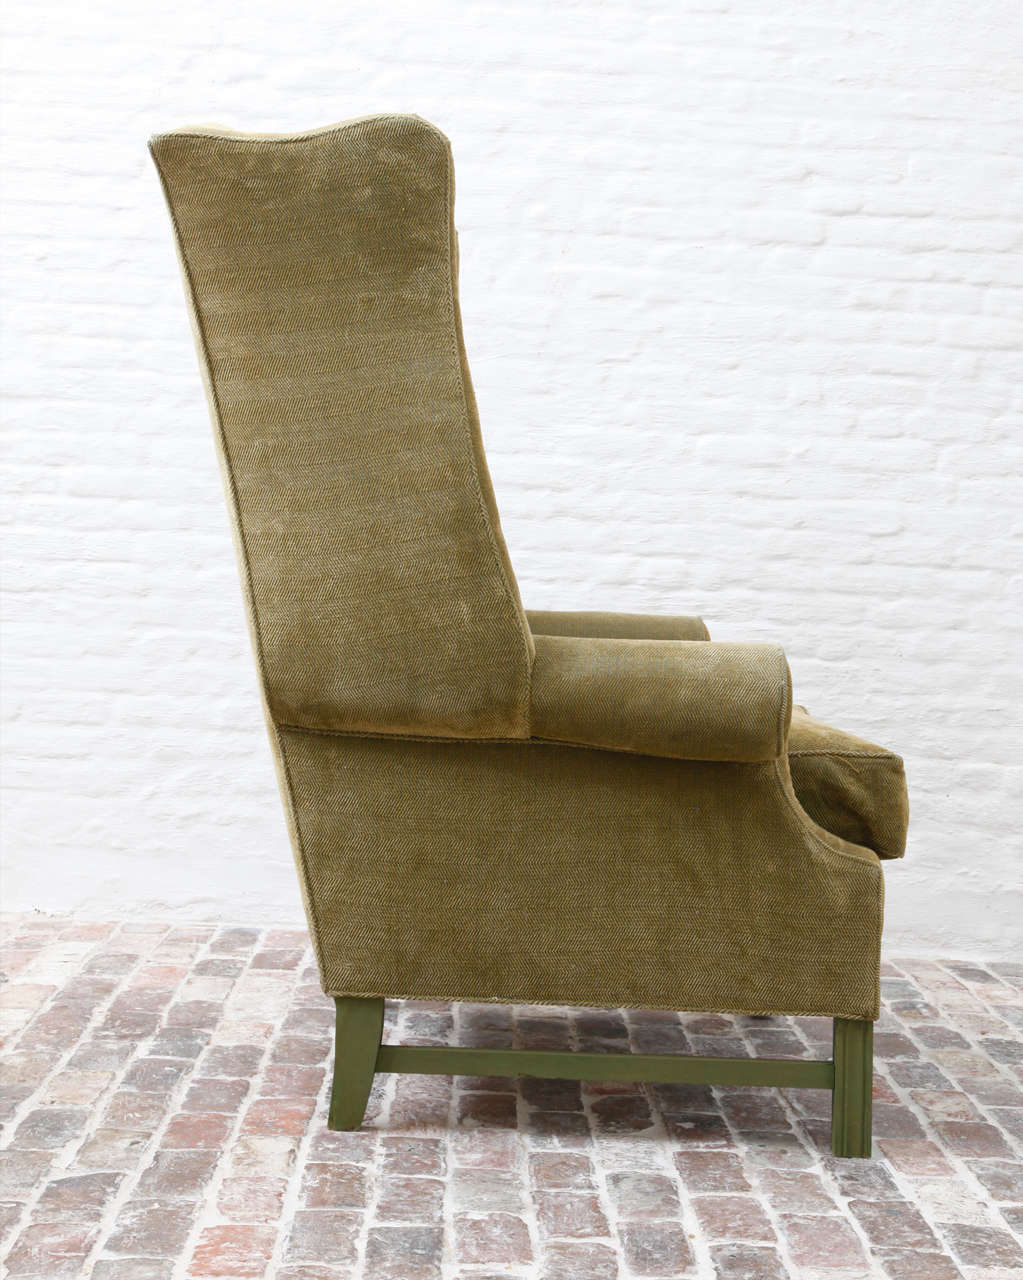 British Green Painted Oversized English Wingback Armchair For Sale